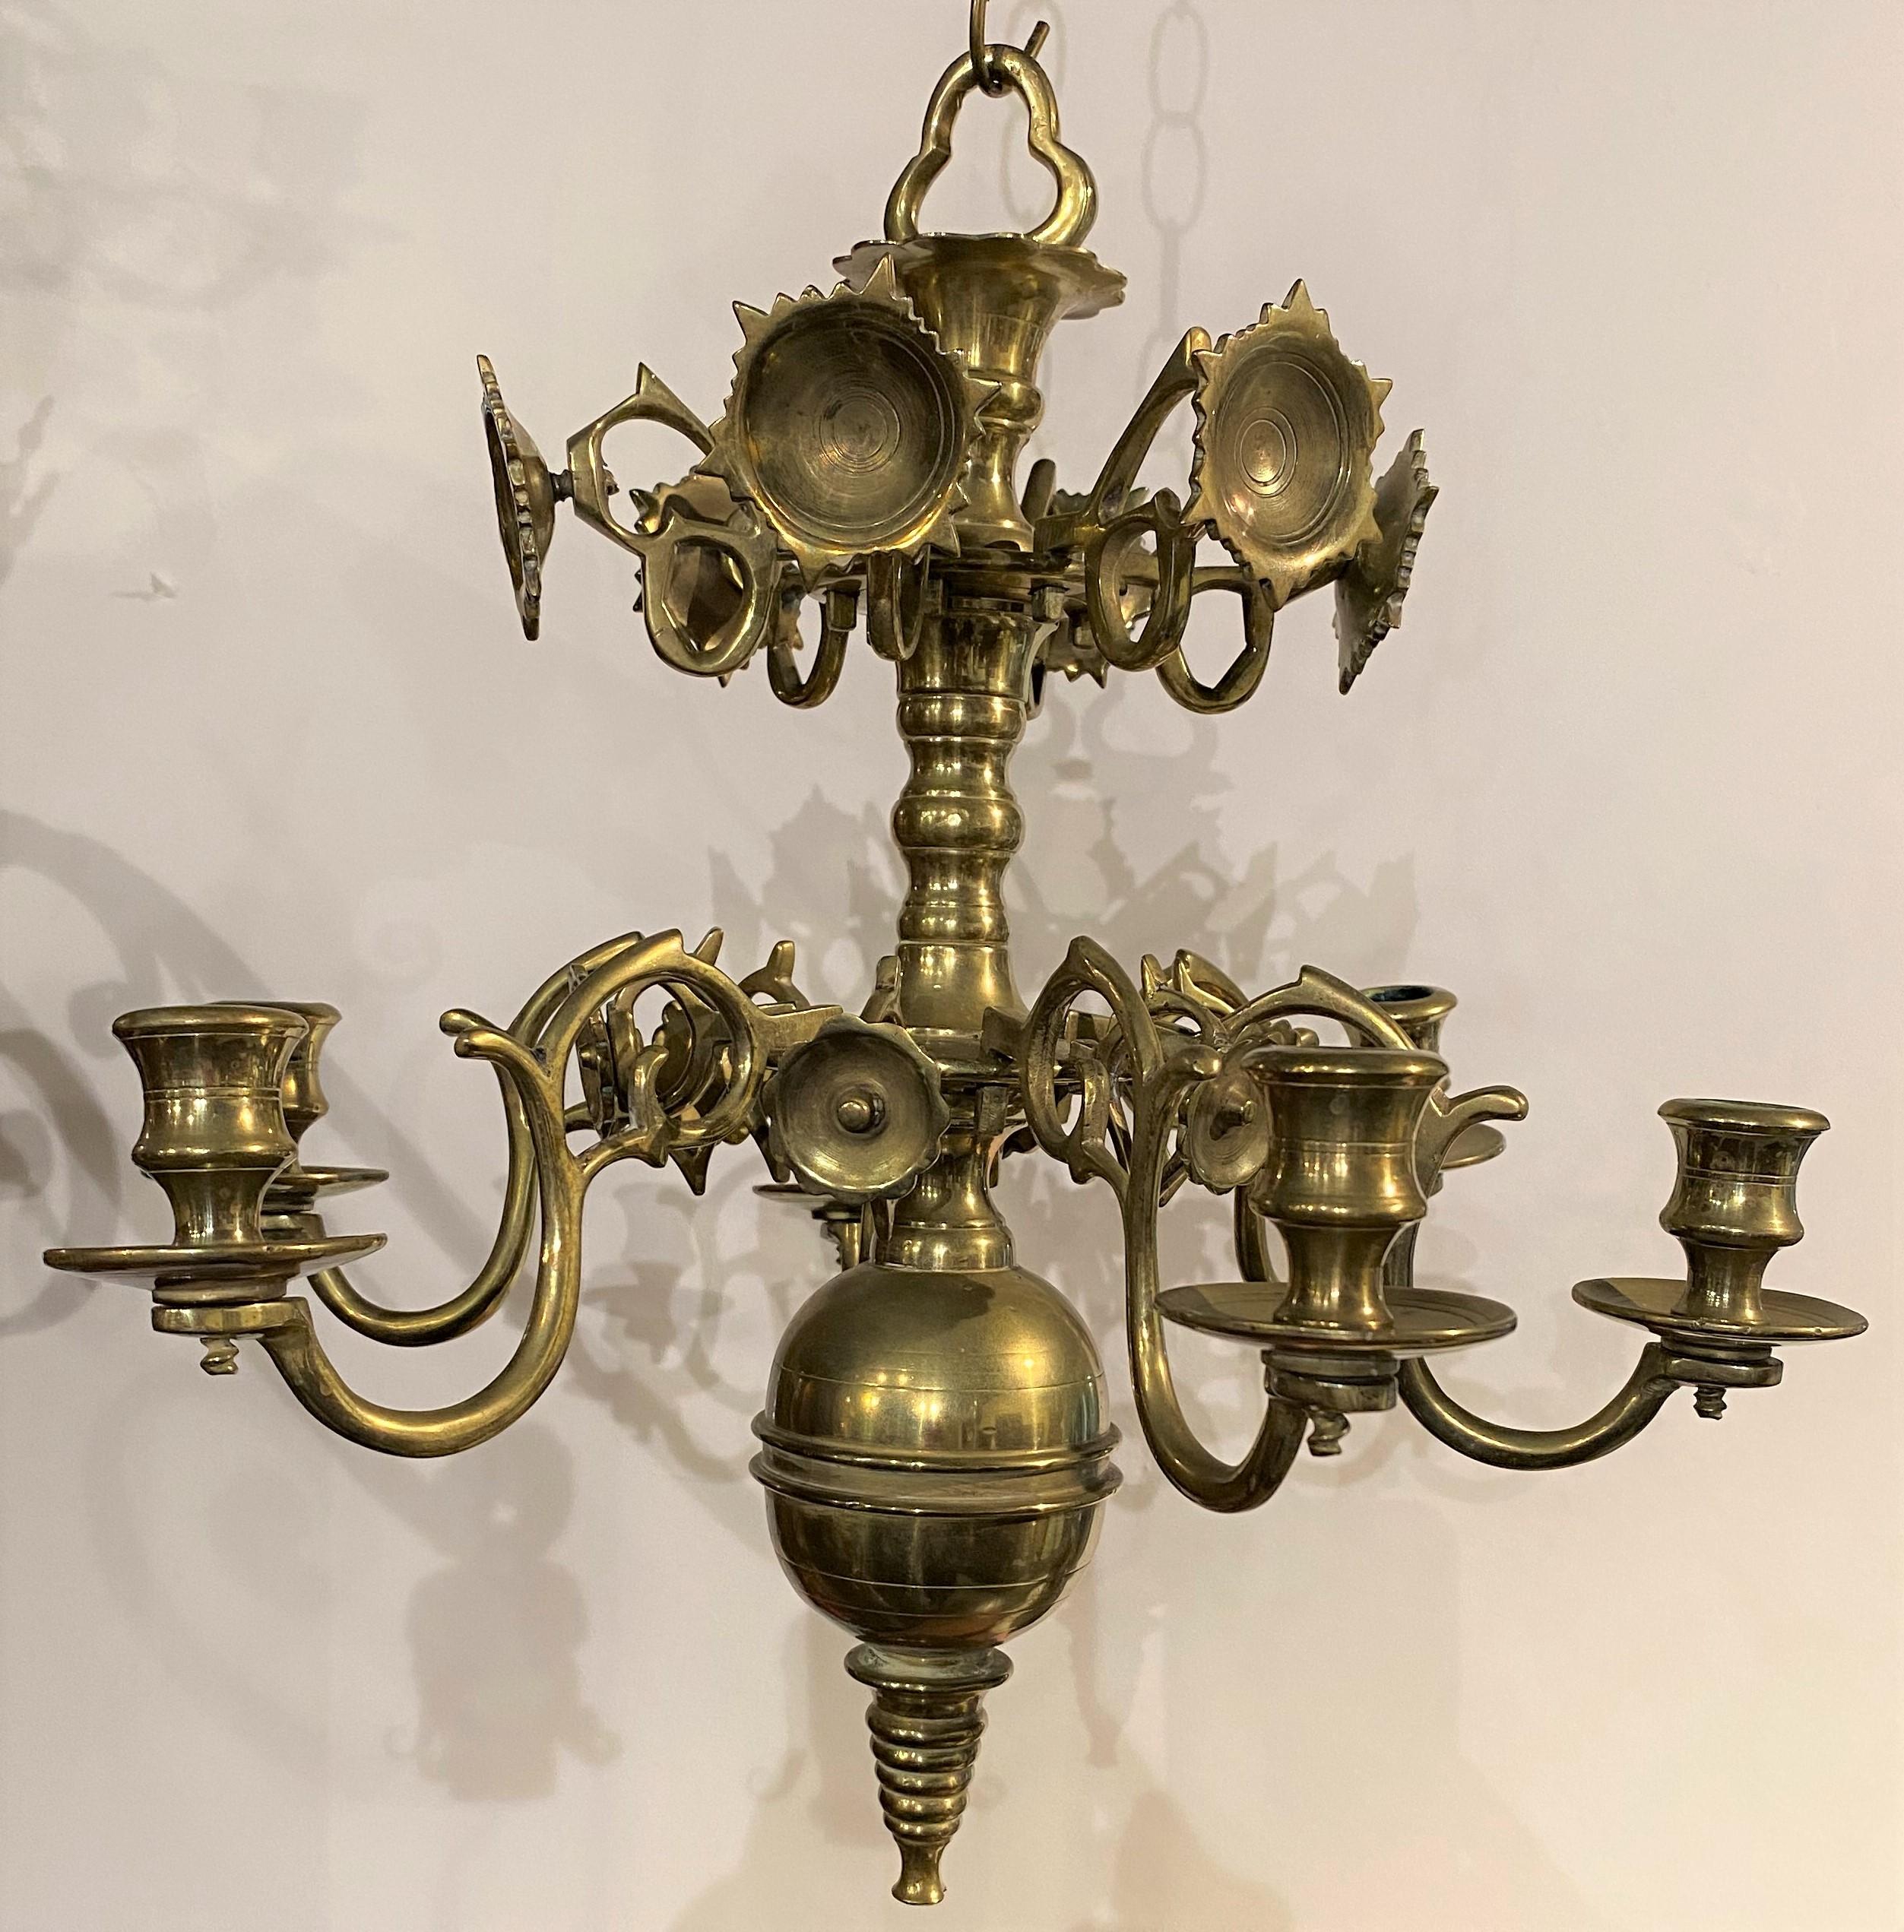 A fine pair of 18th or 19th century diminutive Dutch brass chandeliers, each with central baluster issuing six lamp or candle arms with drip pans on the lower tier, tapered ringed finial extending down from a brass ball, and six sunbursts on the